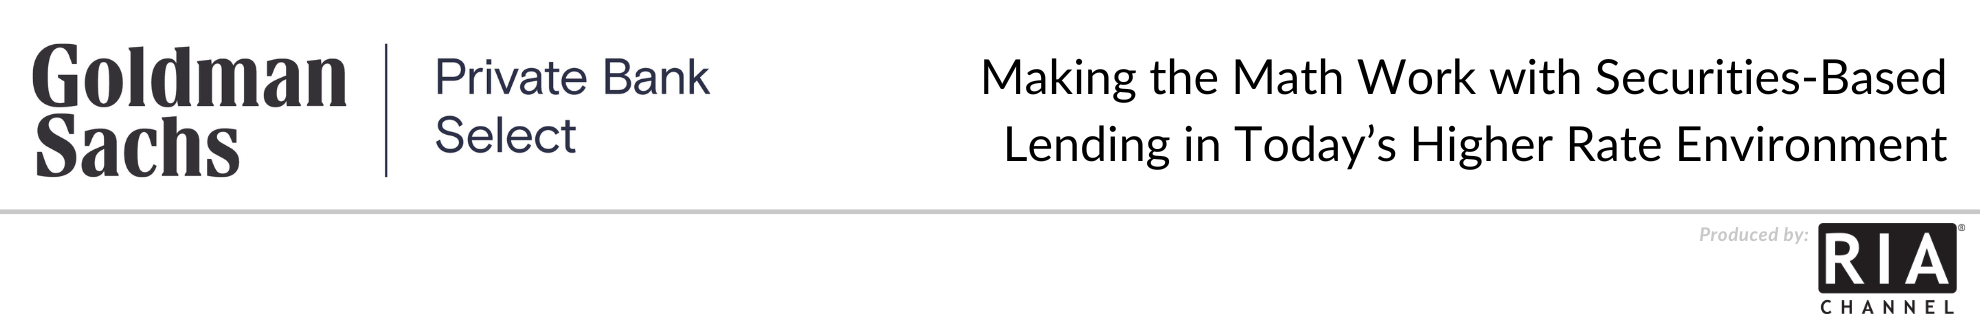 Making the Math Work with Securities-Based Lending in Today’s Higher Rate Environment